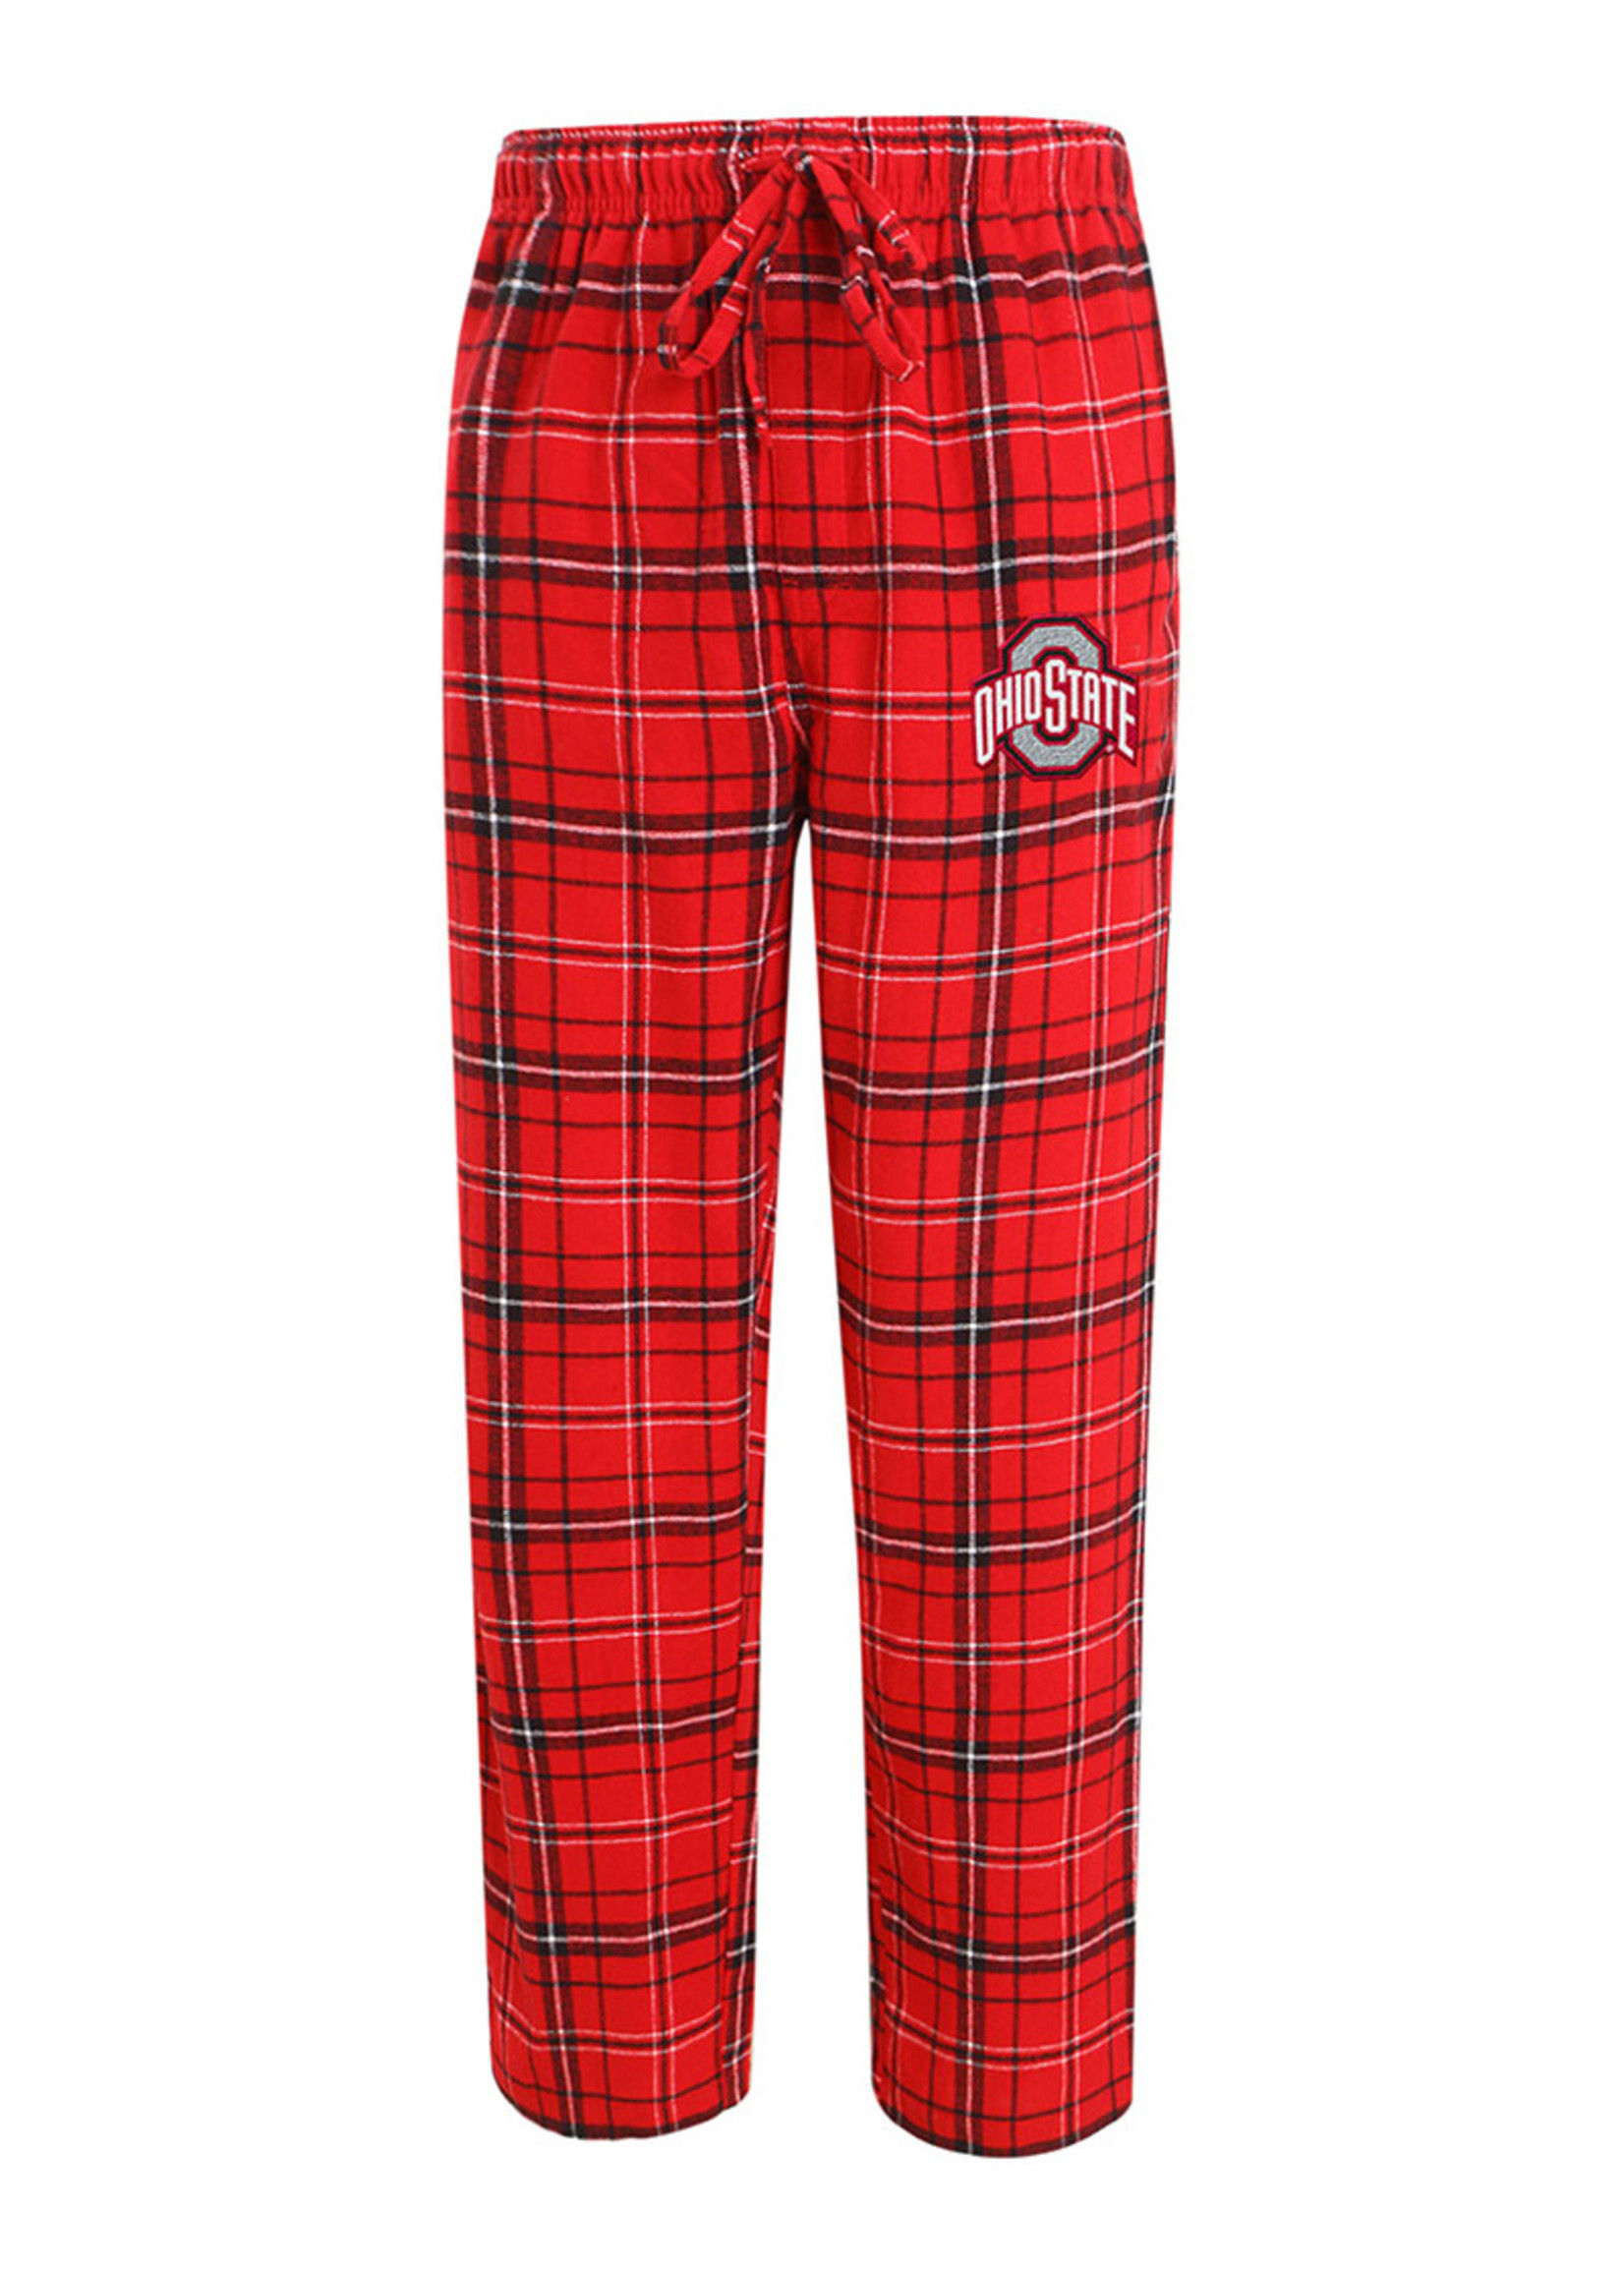 Ohio State Buckeyes Red Plaid Flannel Lounge Pants